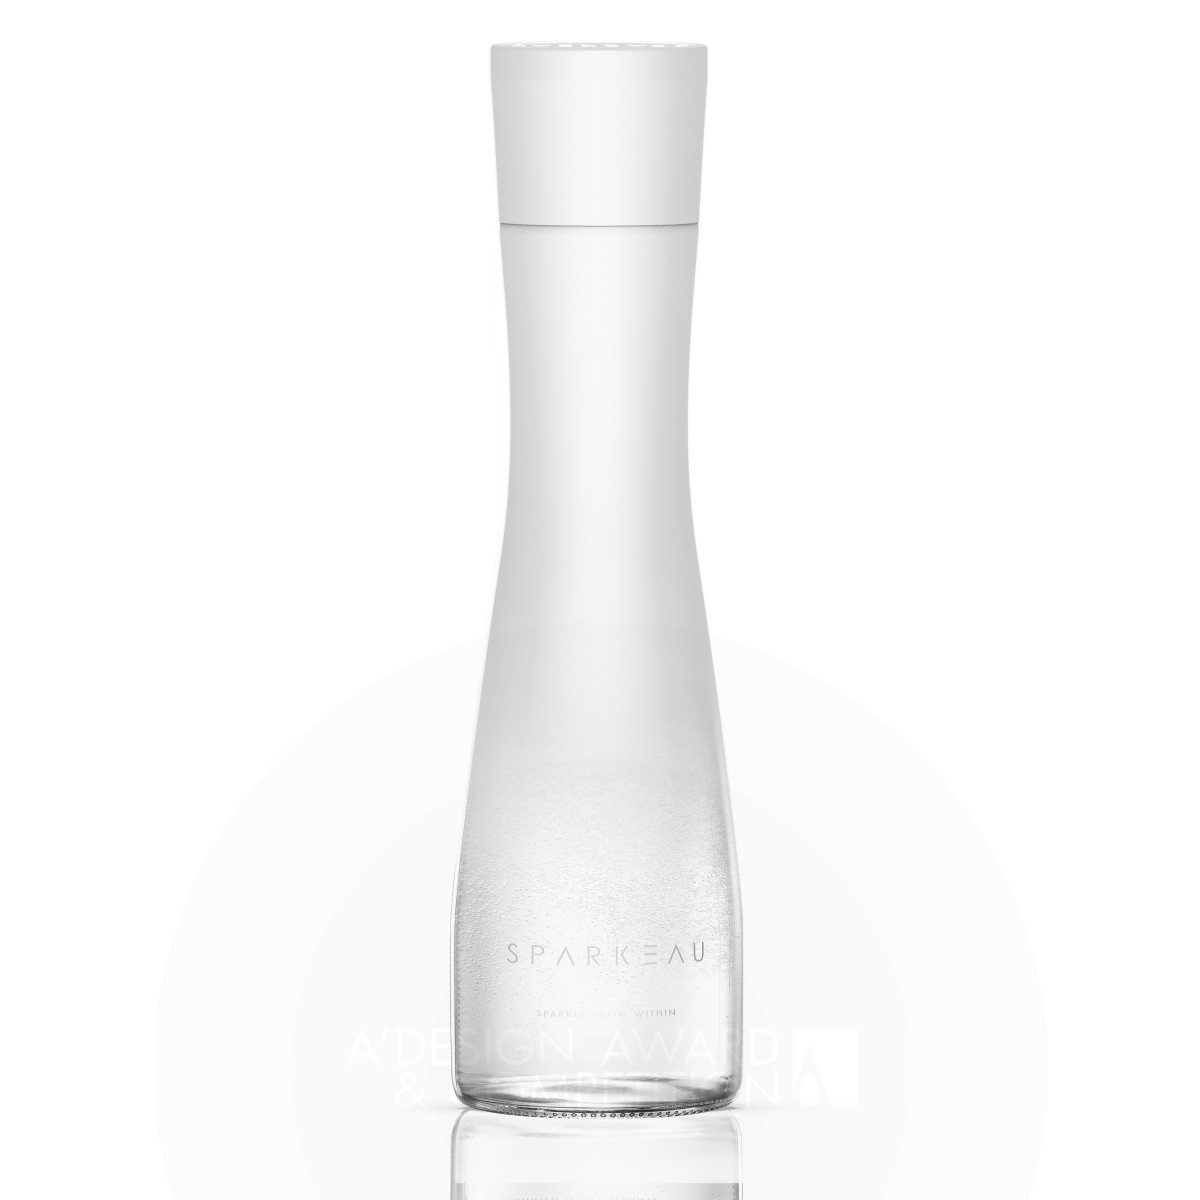 Sparkeau Sparkling Water Bottle by Jus Qi Co., Ltd, Wei Ping Chen